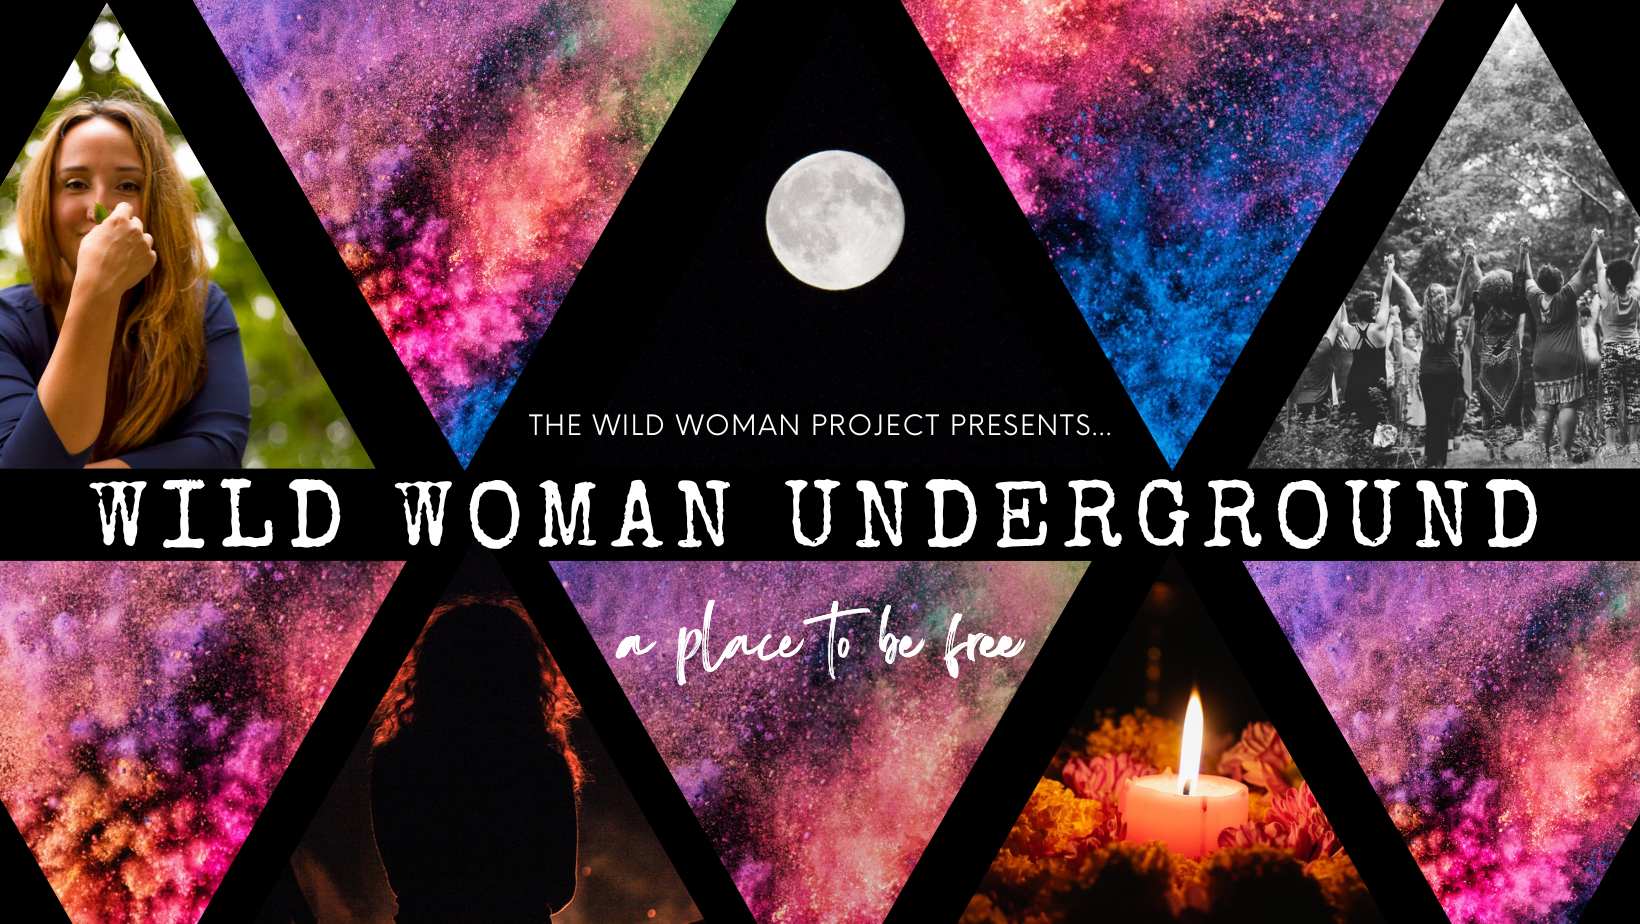 Wild Woman Underground: A place to be free